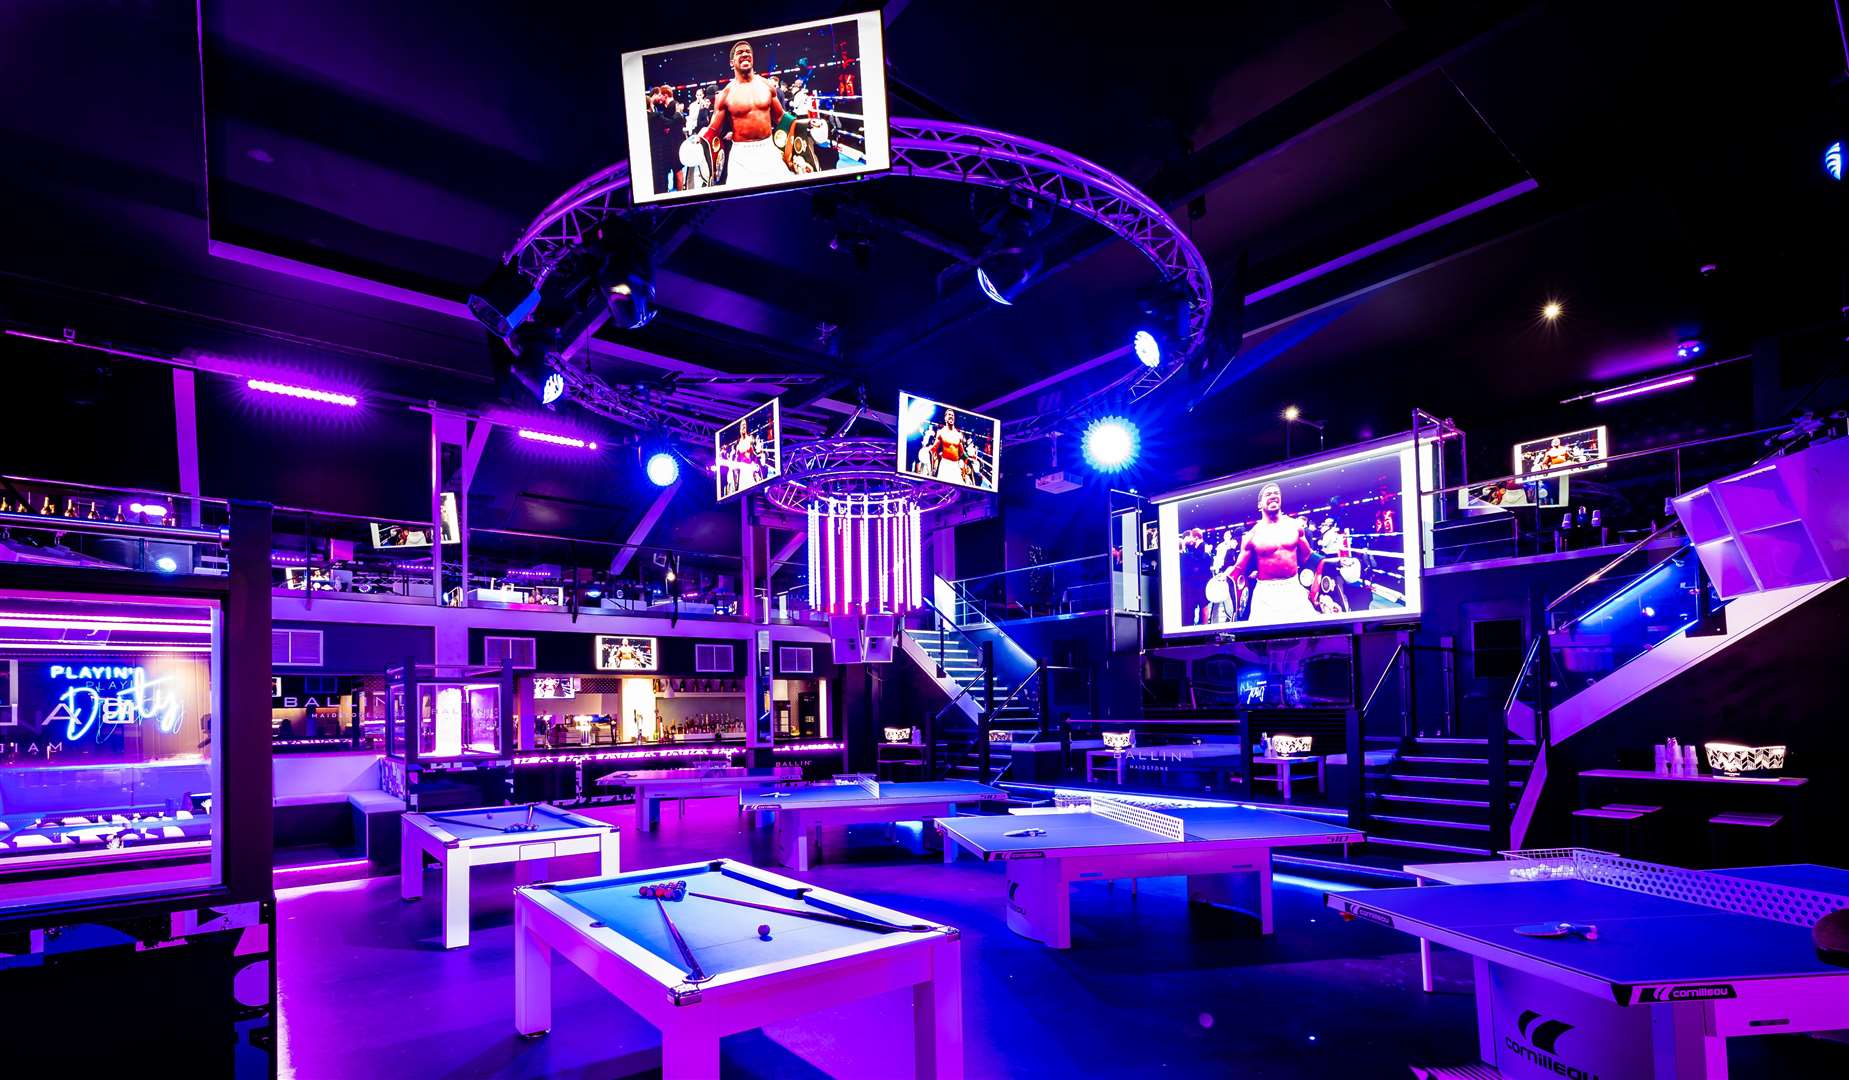 BALLIN’ Maidstone is a brand new social venue in the heart of Kent!